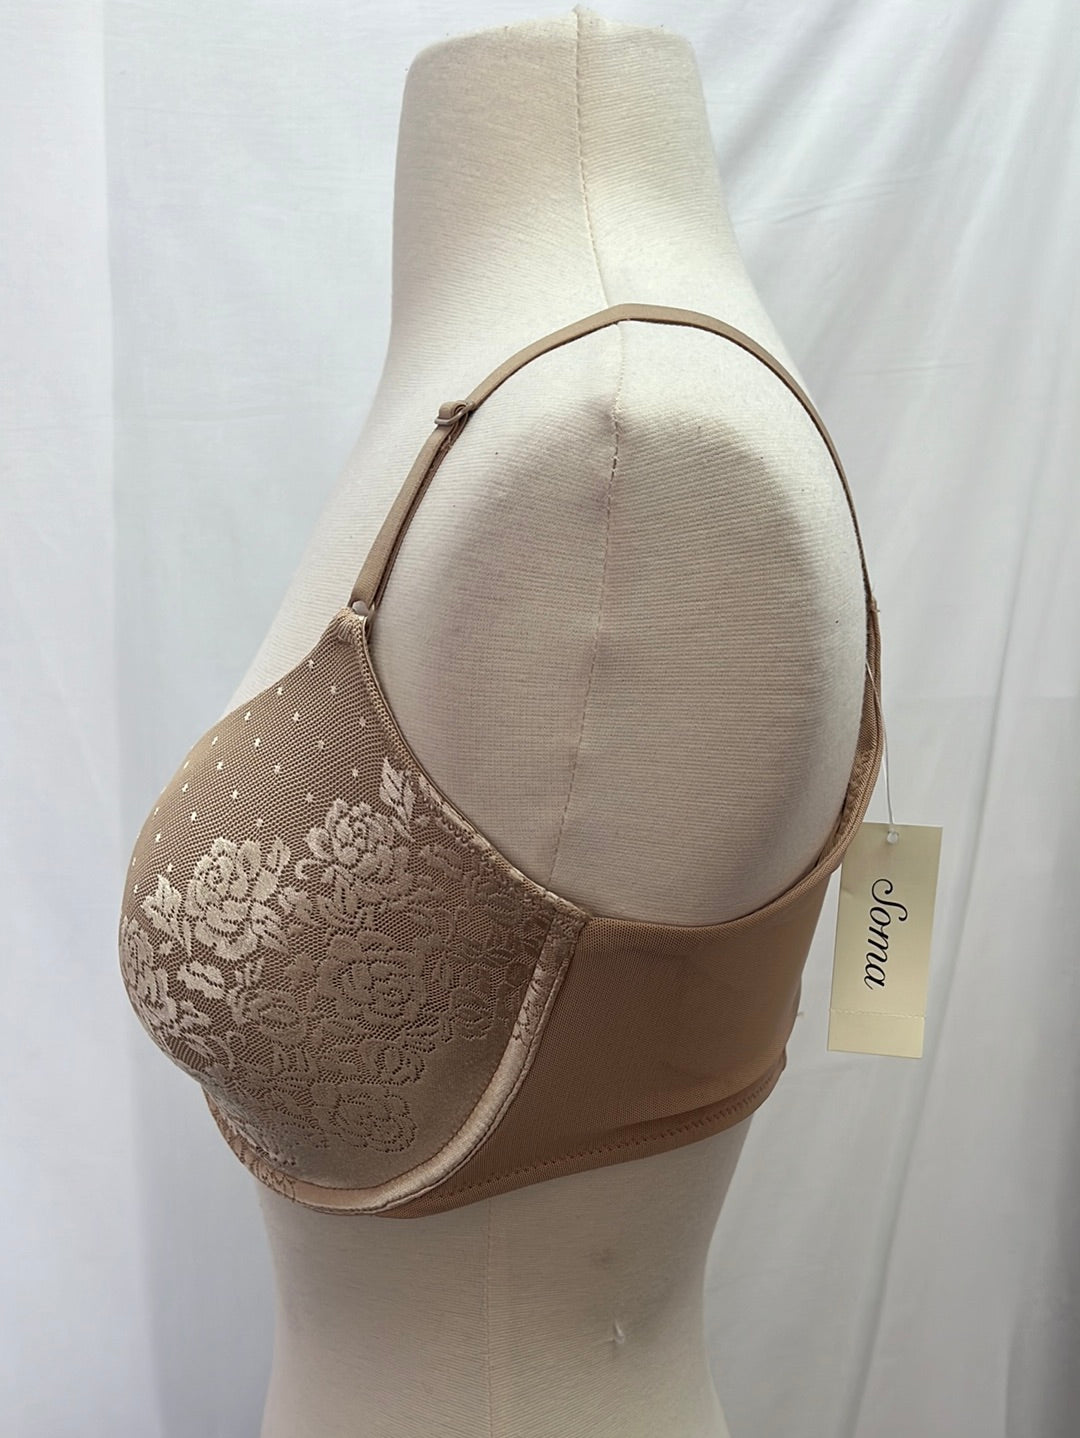 NWT -- SOMA Stunning Support Nude Floral Lace Posture Bra -- Size 32DD